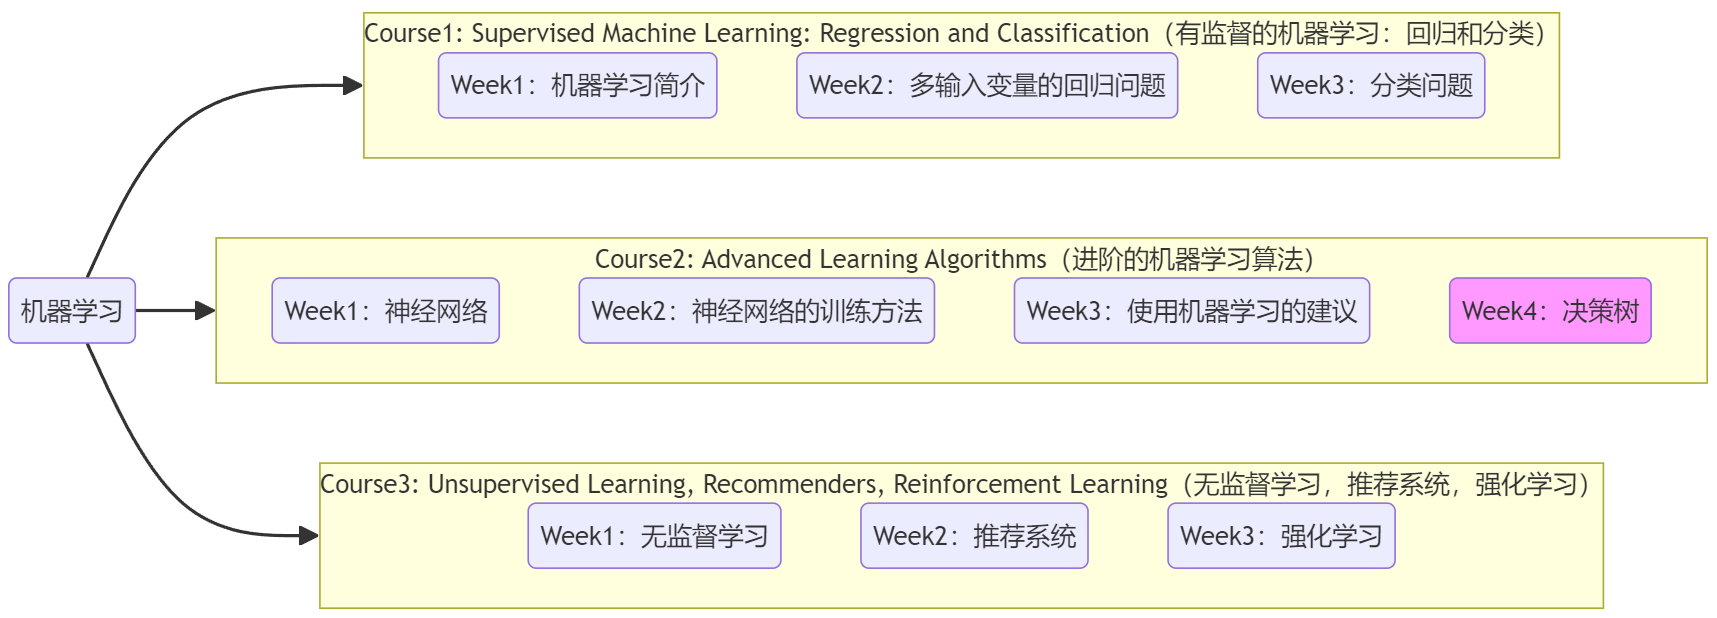 Course2-Week4-决策树